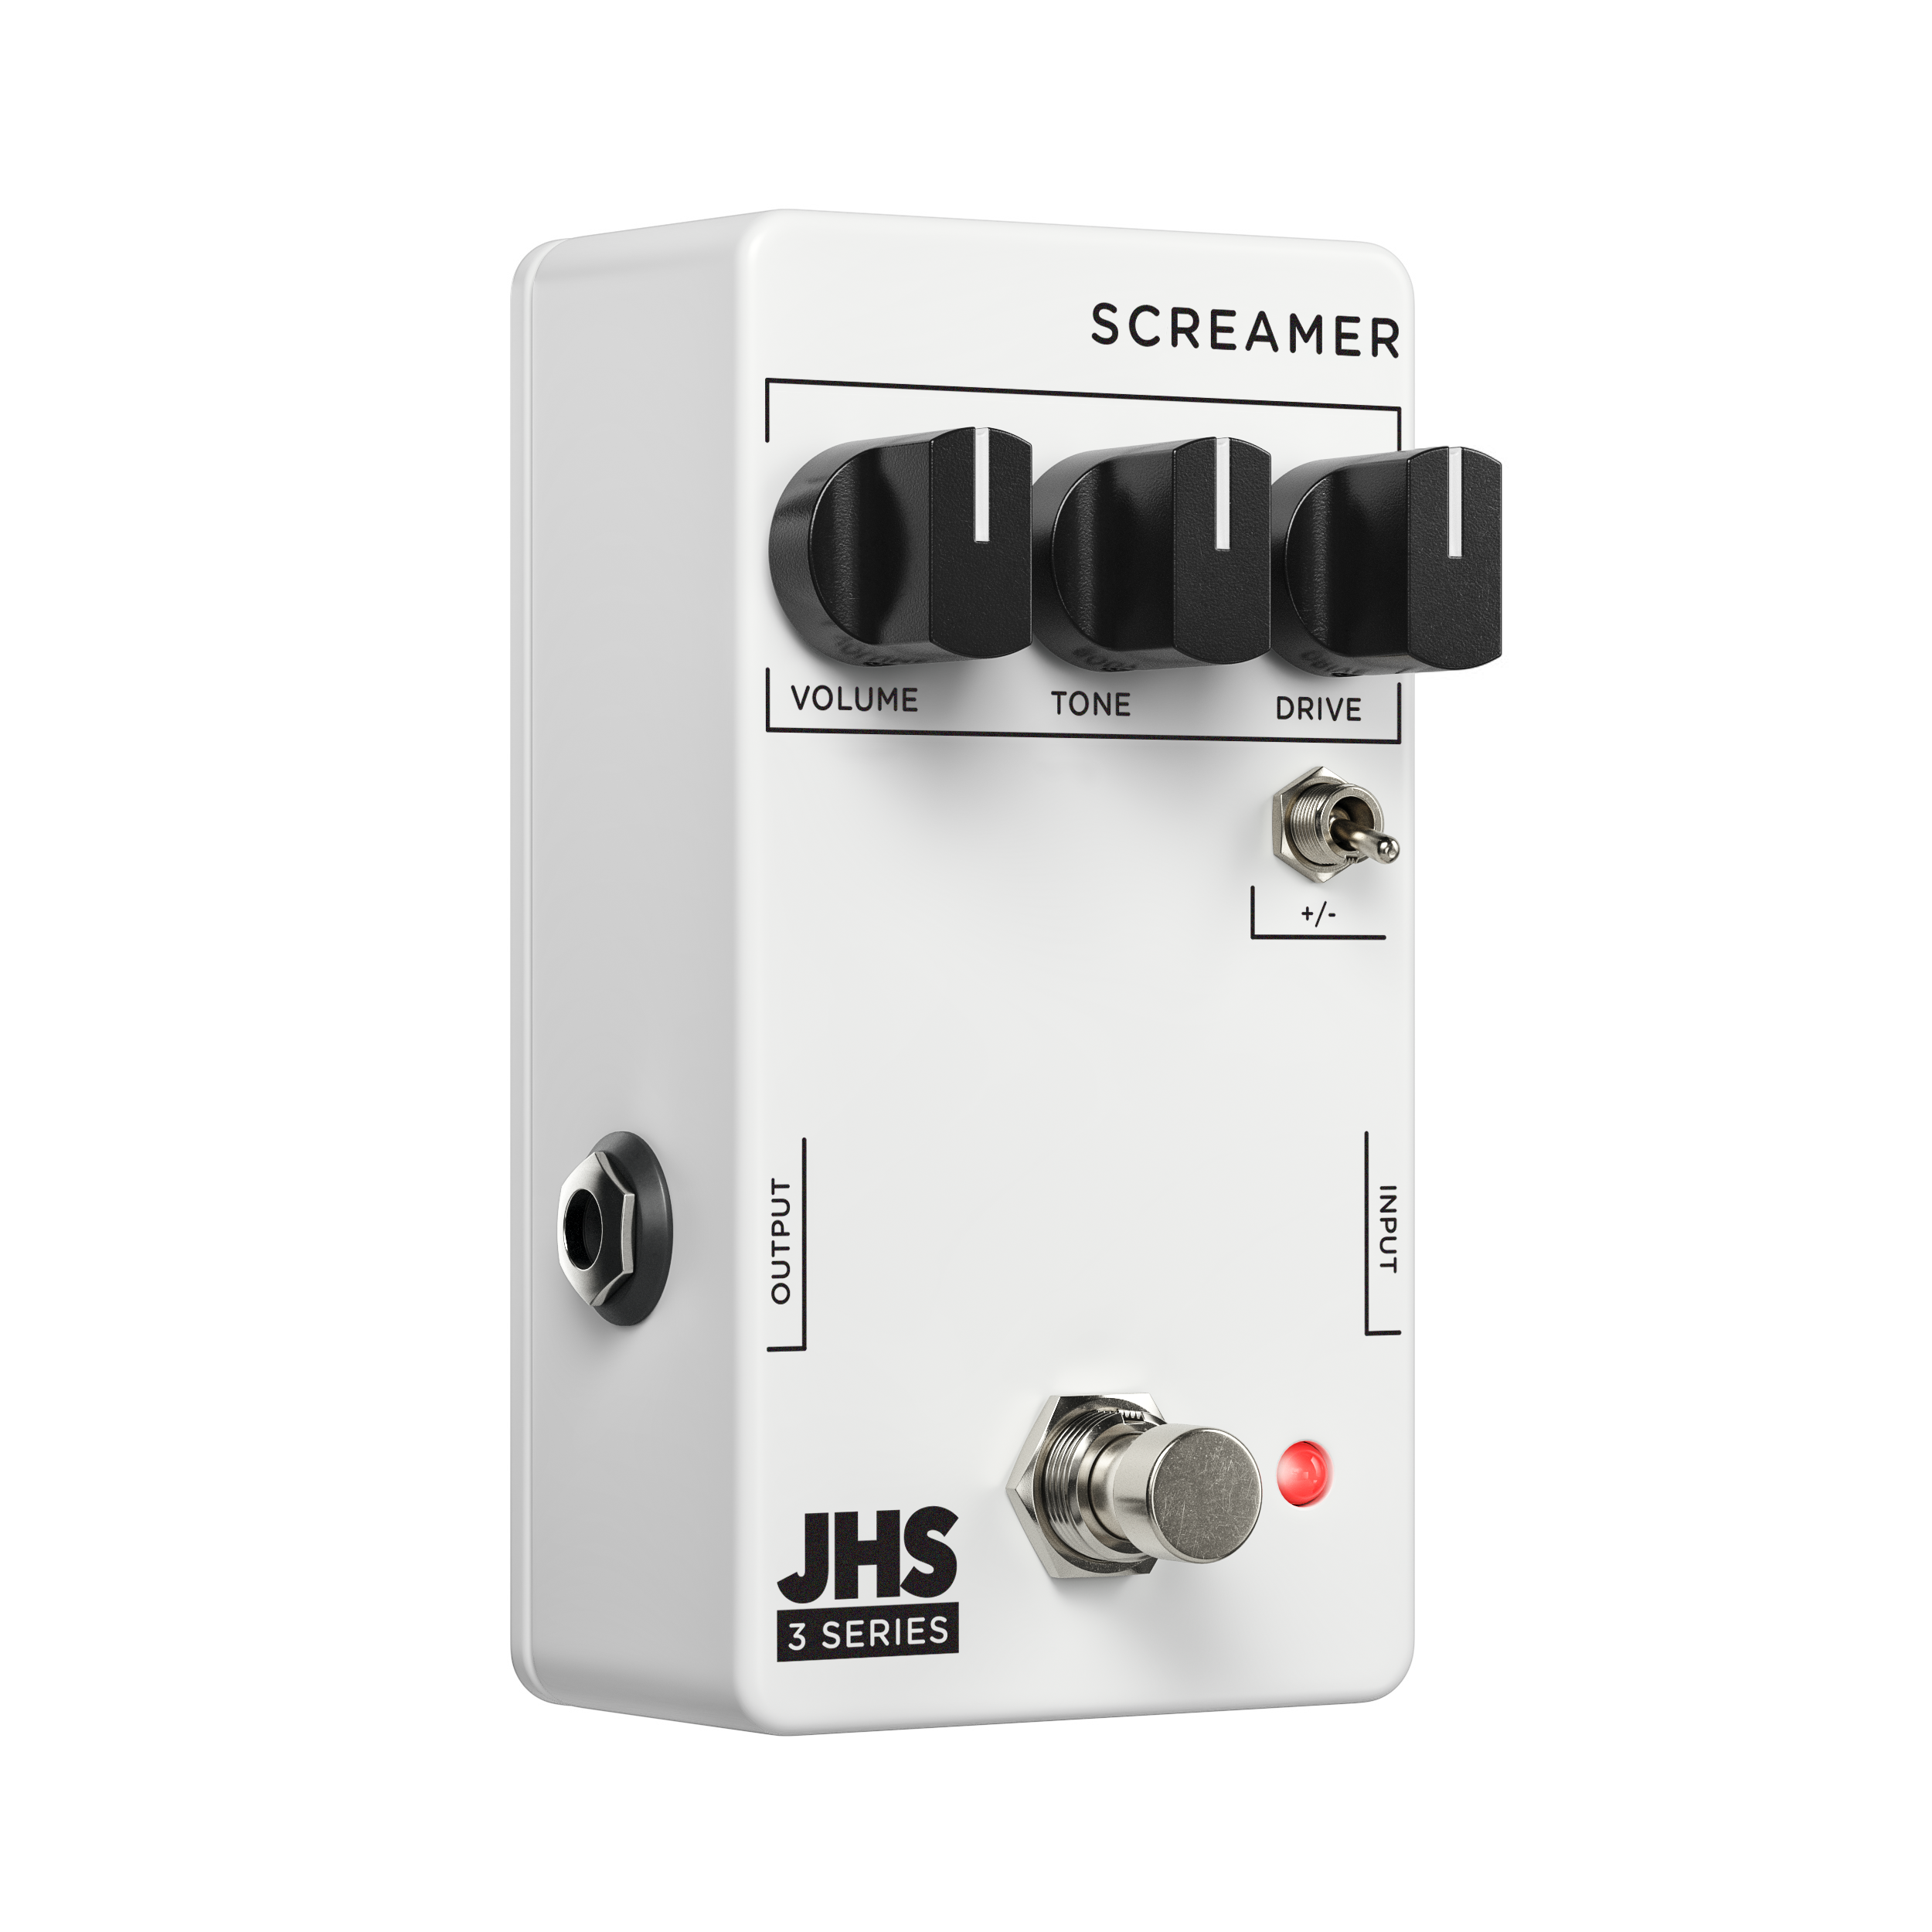 JHS 3 Series SCREAMER Guitar Compact Effects Pedals - Full Warranty!